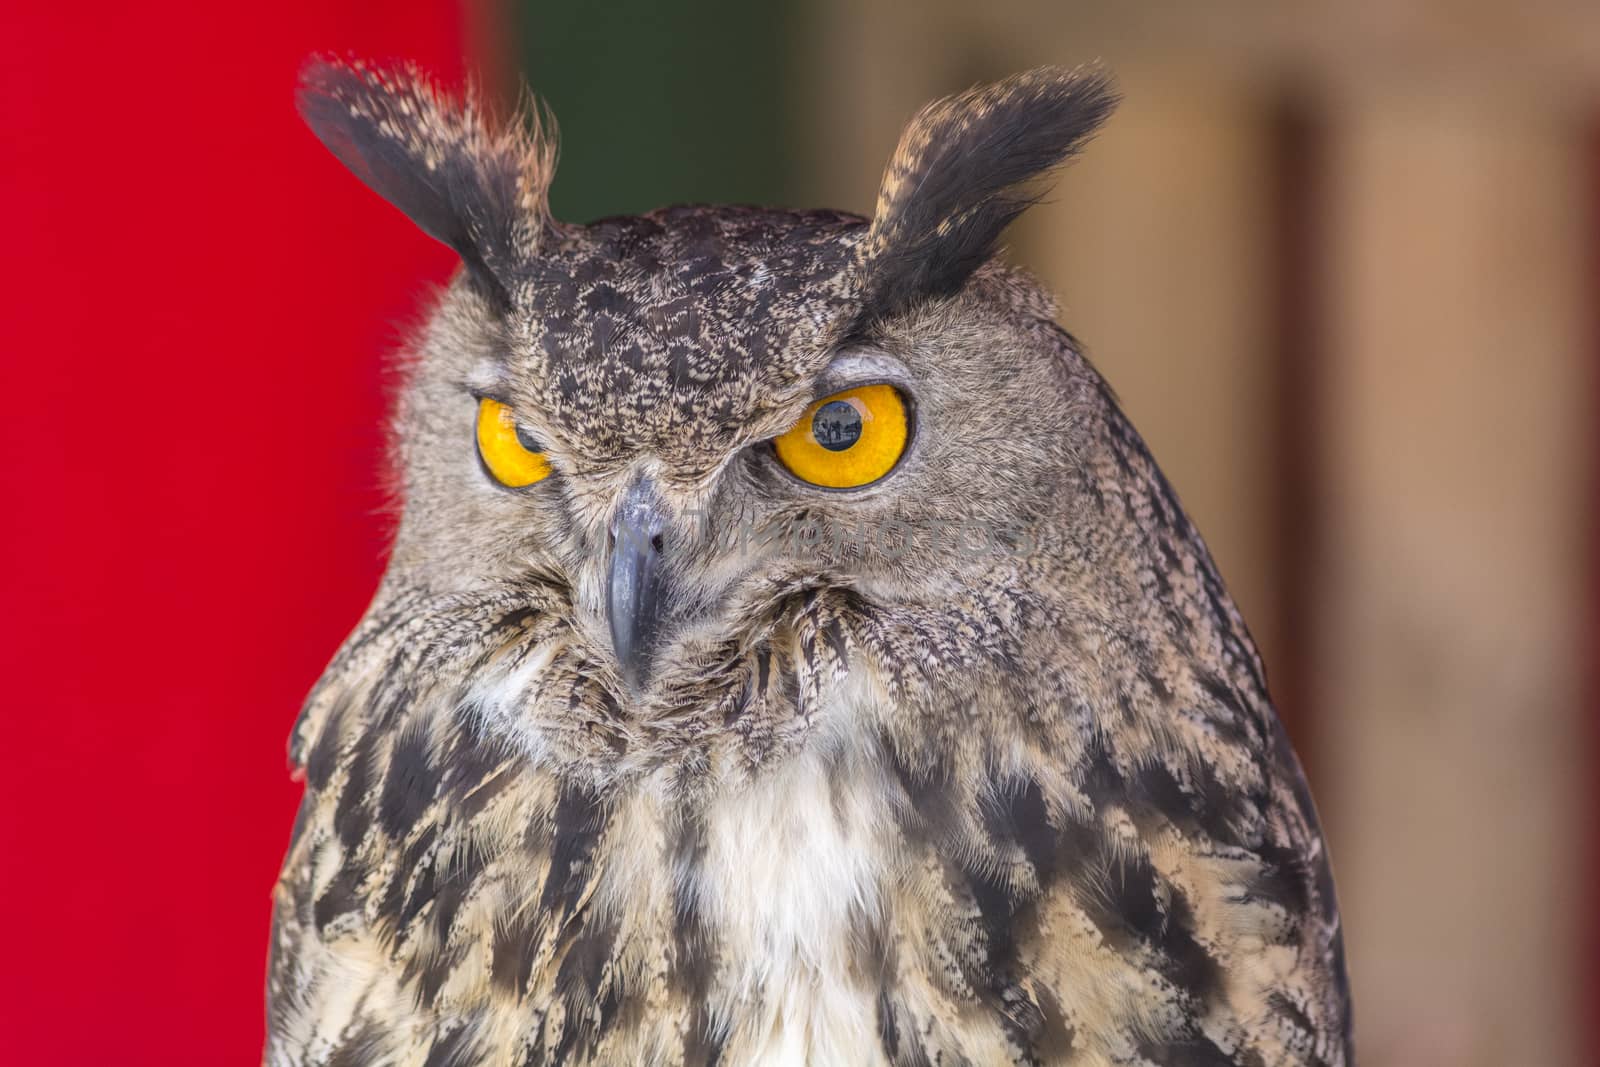 The Eurasian eagle-owl (Bubo bubo), species of eagle-owl resident in much of Eurasia